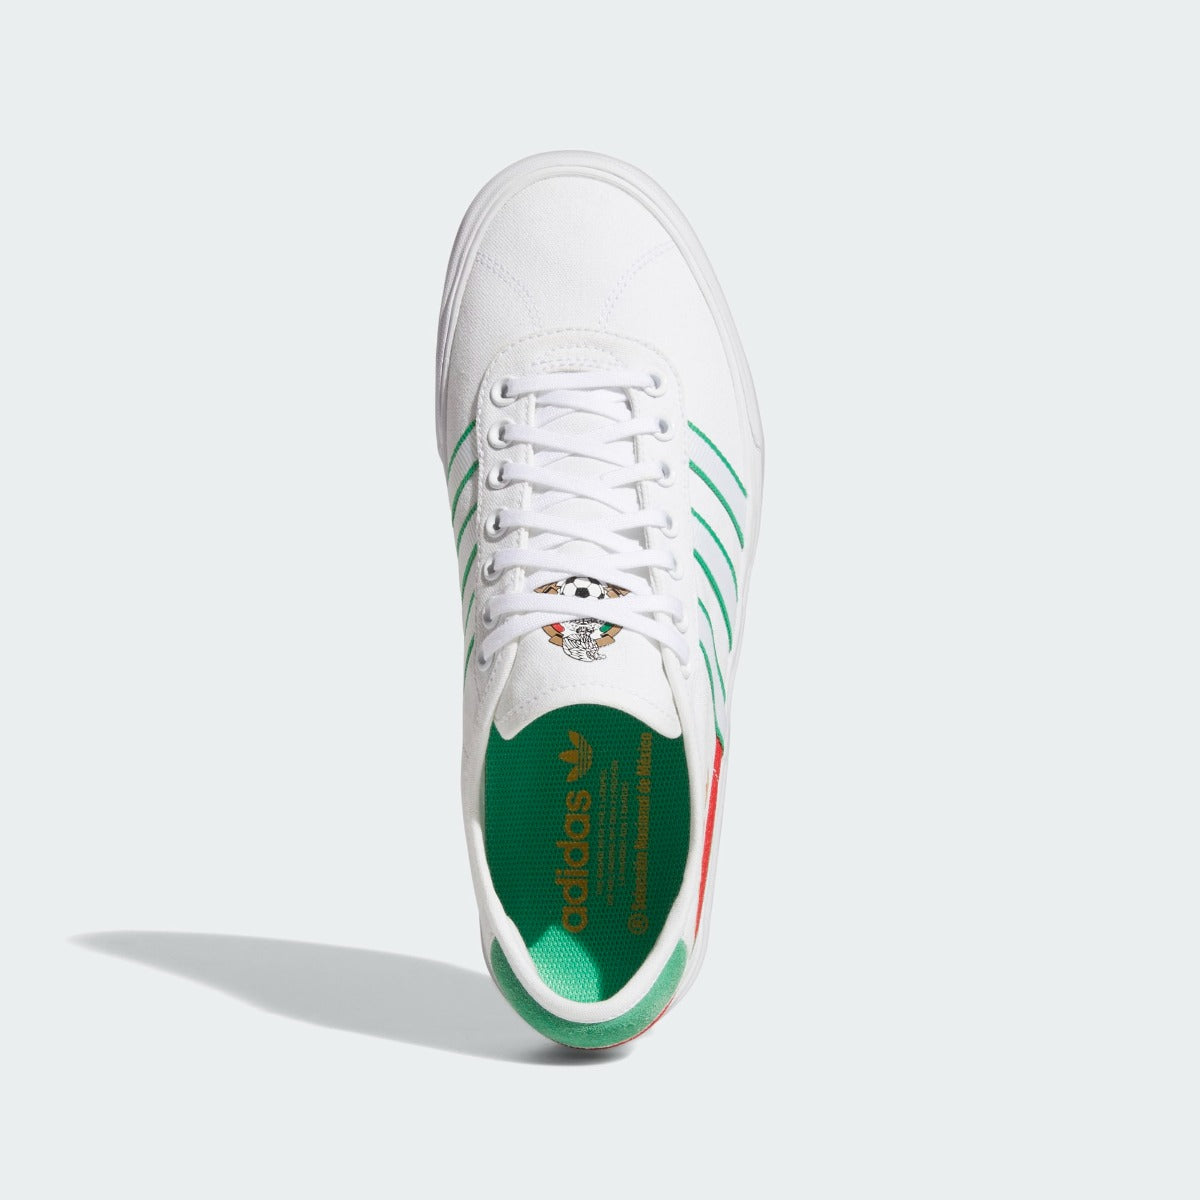 Adidas DELPALA x FMF Skate-Inspired Shoes - White-Green (Top)